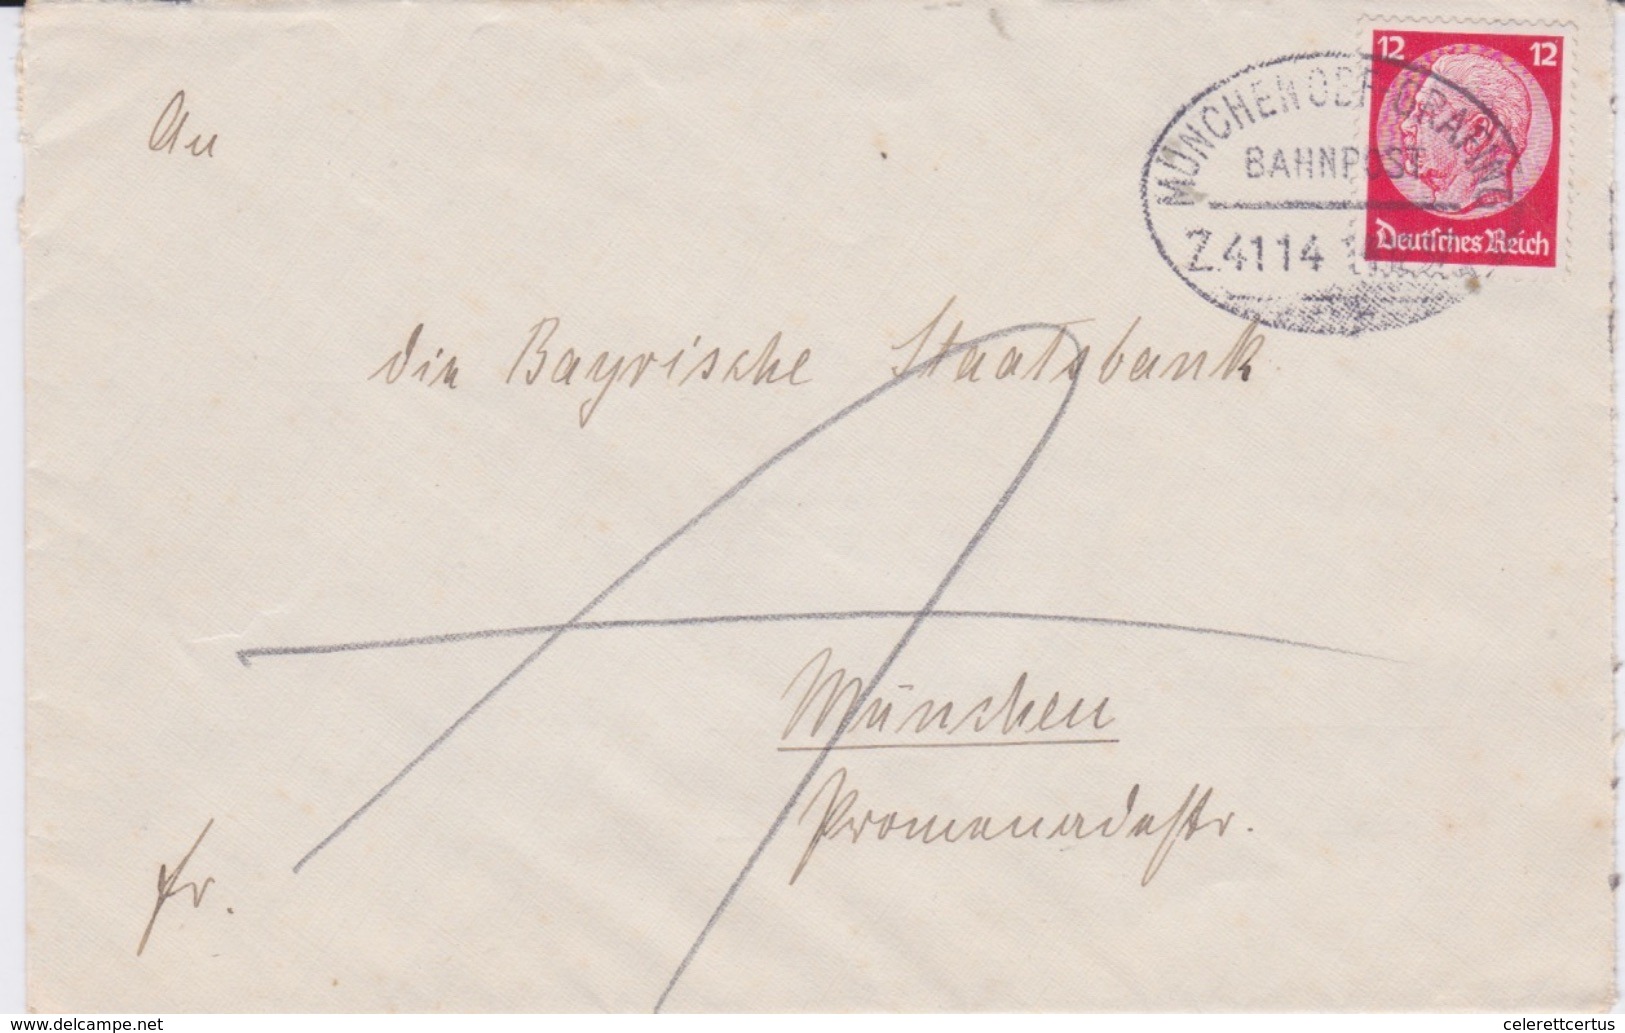 Germany-1937 12 Pf Red On Railway Traveling Post Office Muncher Off-Grafing Bahnpost Z 4114 Cover To Munich - Storia Postale